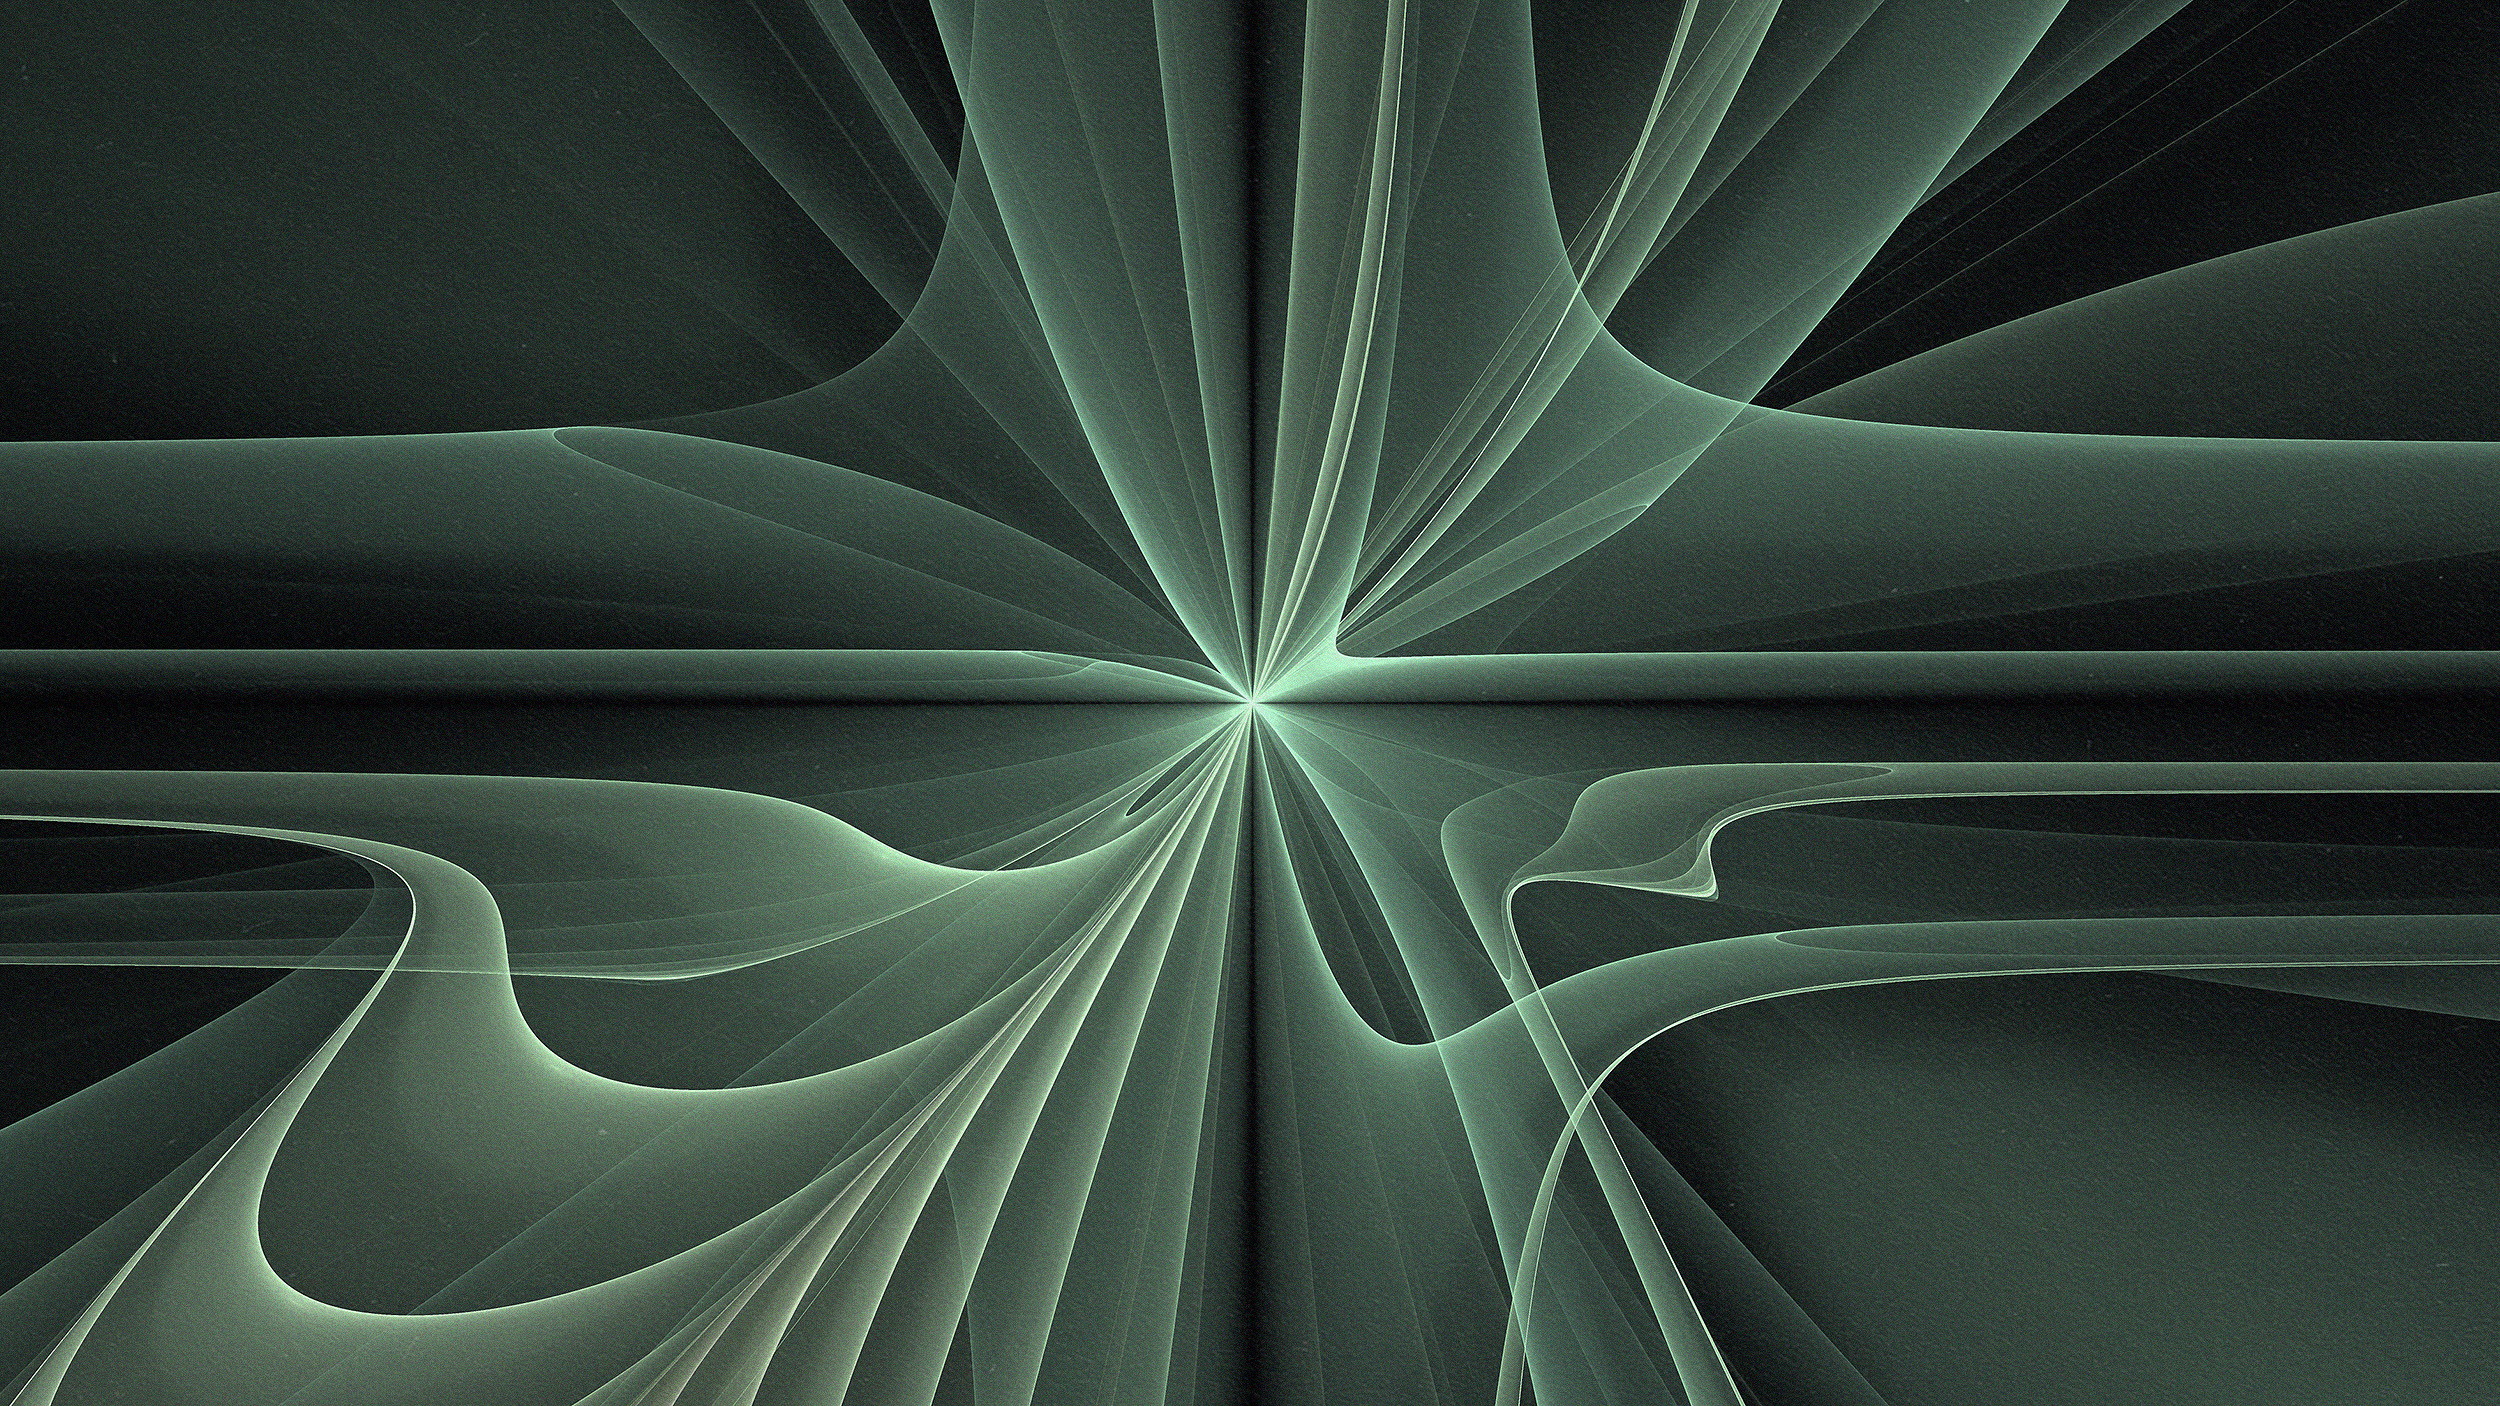 Abstract green fractal design with smooth, curved lines converging at a central point, resembling a flowing, symmetrical pattern against a dark background, inspired by AI physics.